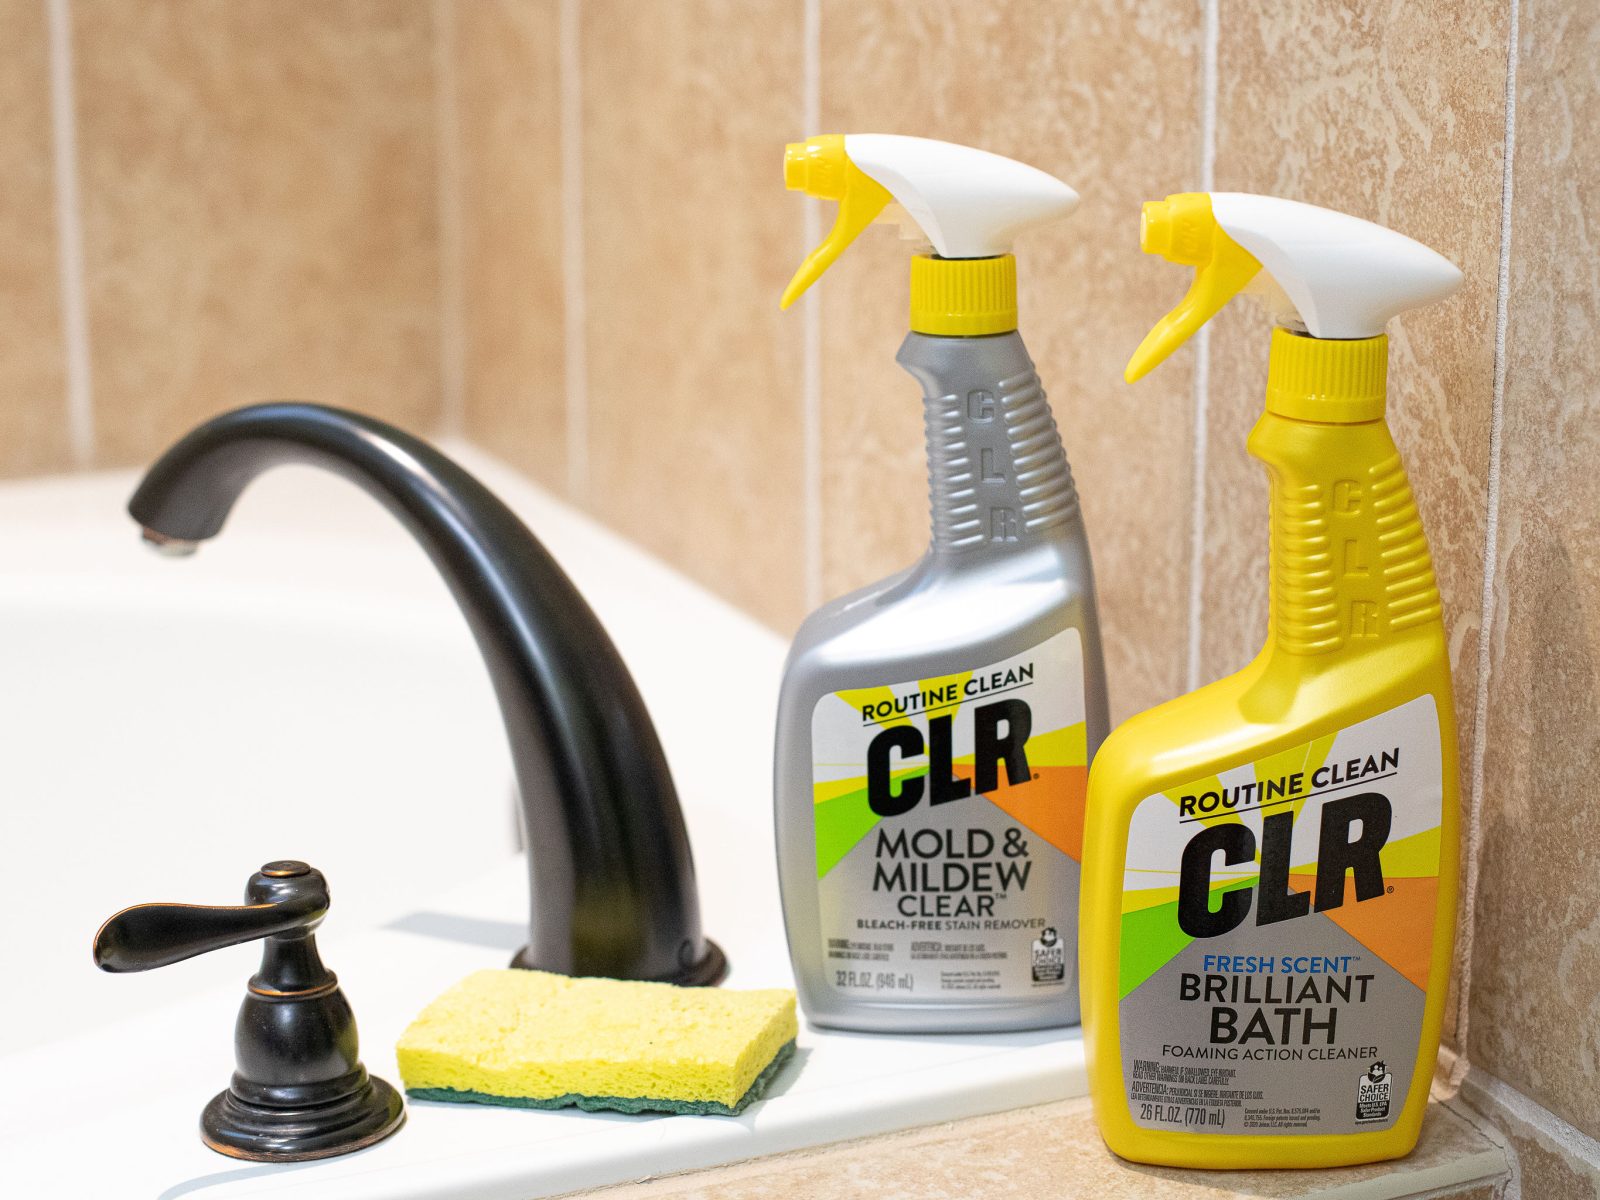 CLR Cleaners Are As Low As $2.99 At Publix